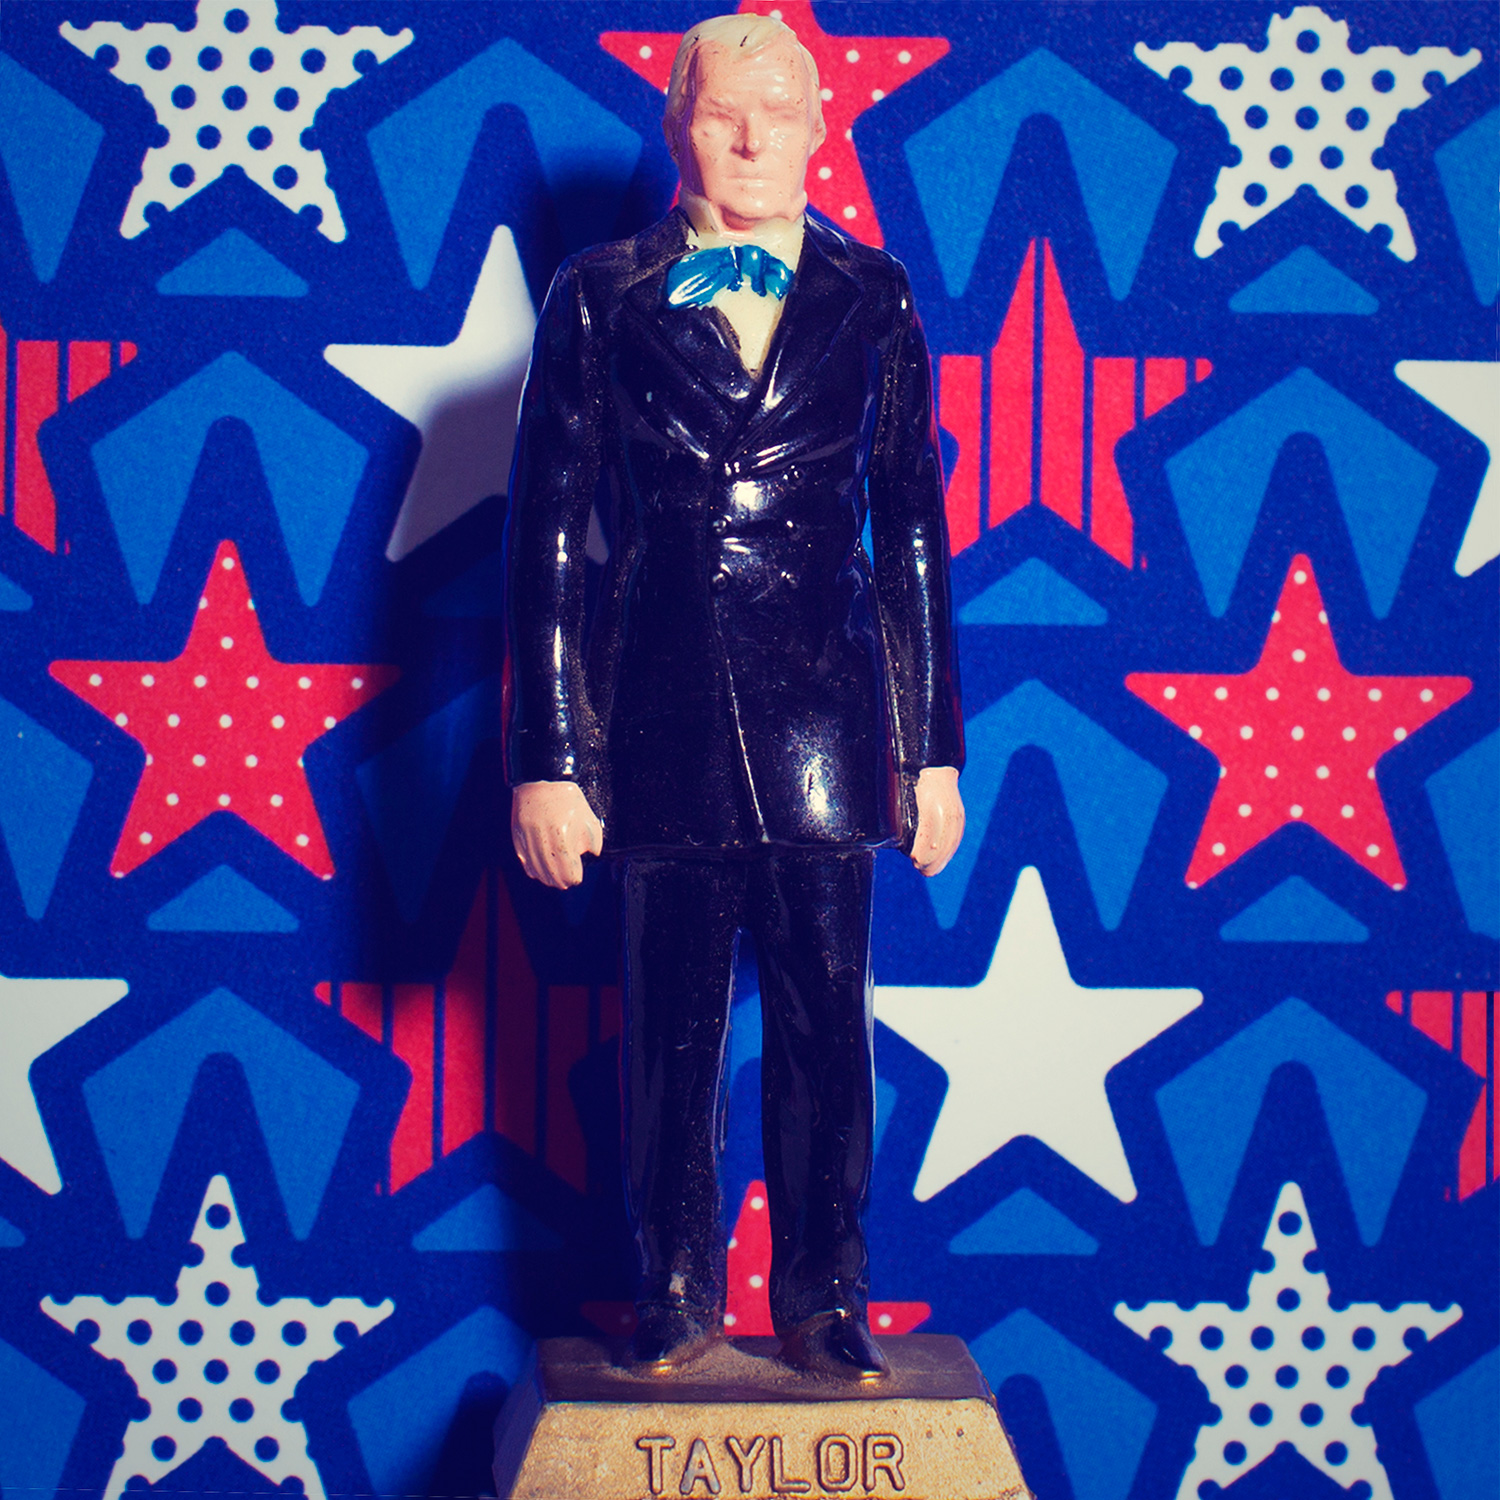 Zachary Taylor: War heroes and conspiracy theory